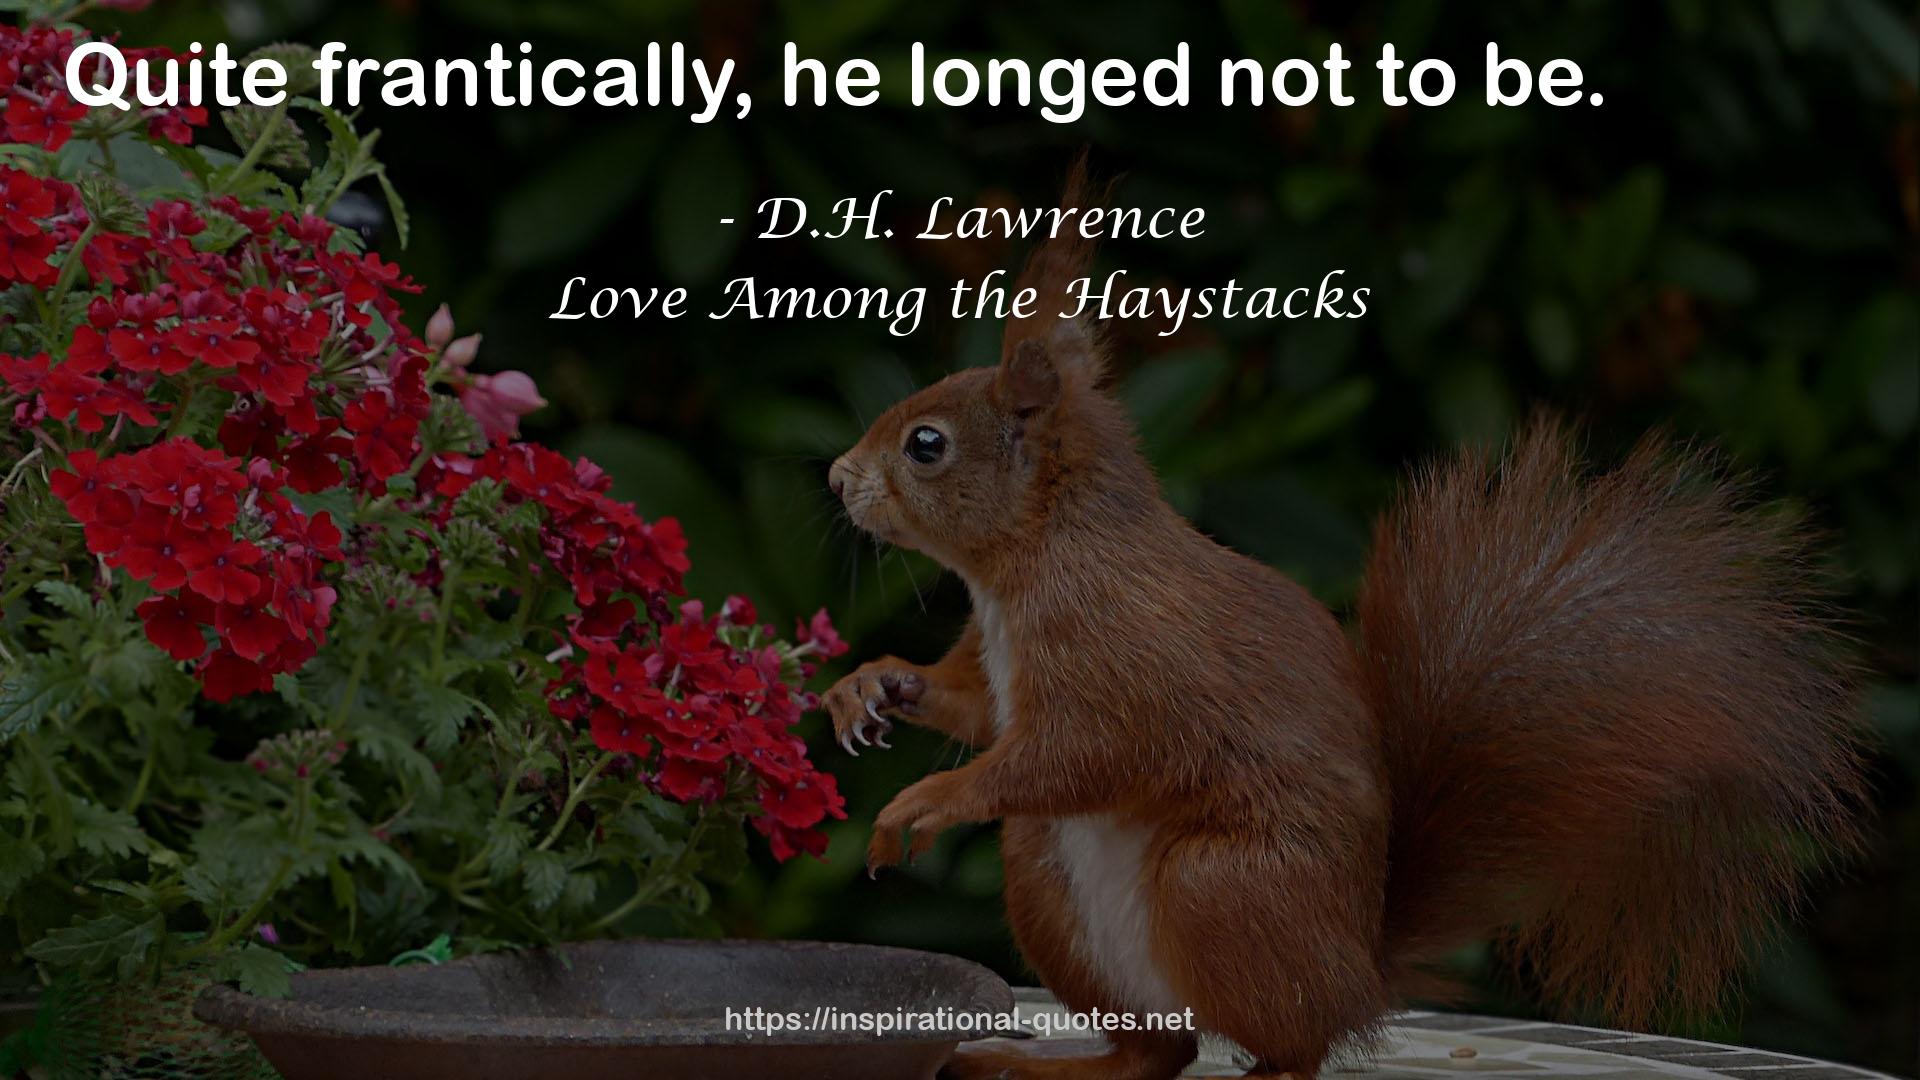 Love Among the Haystacks QUOTES